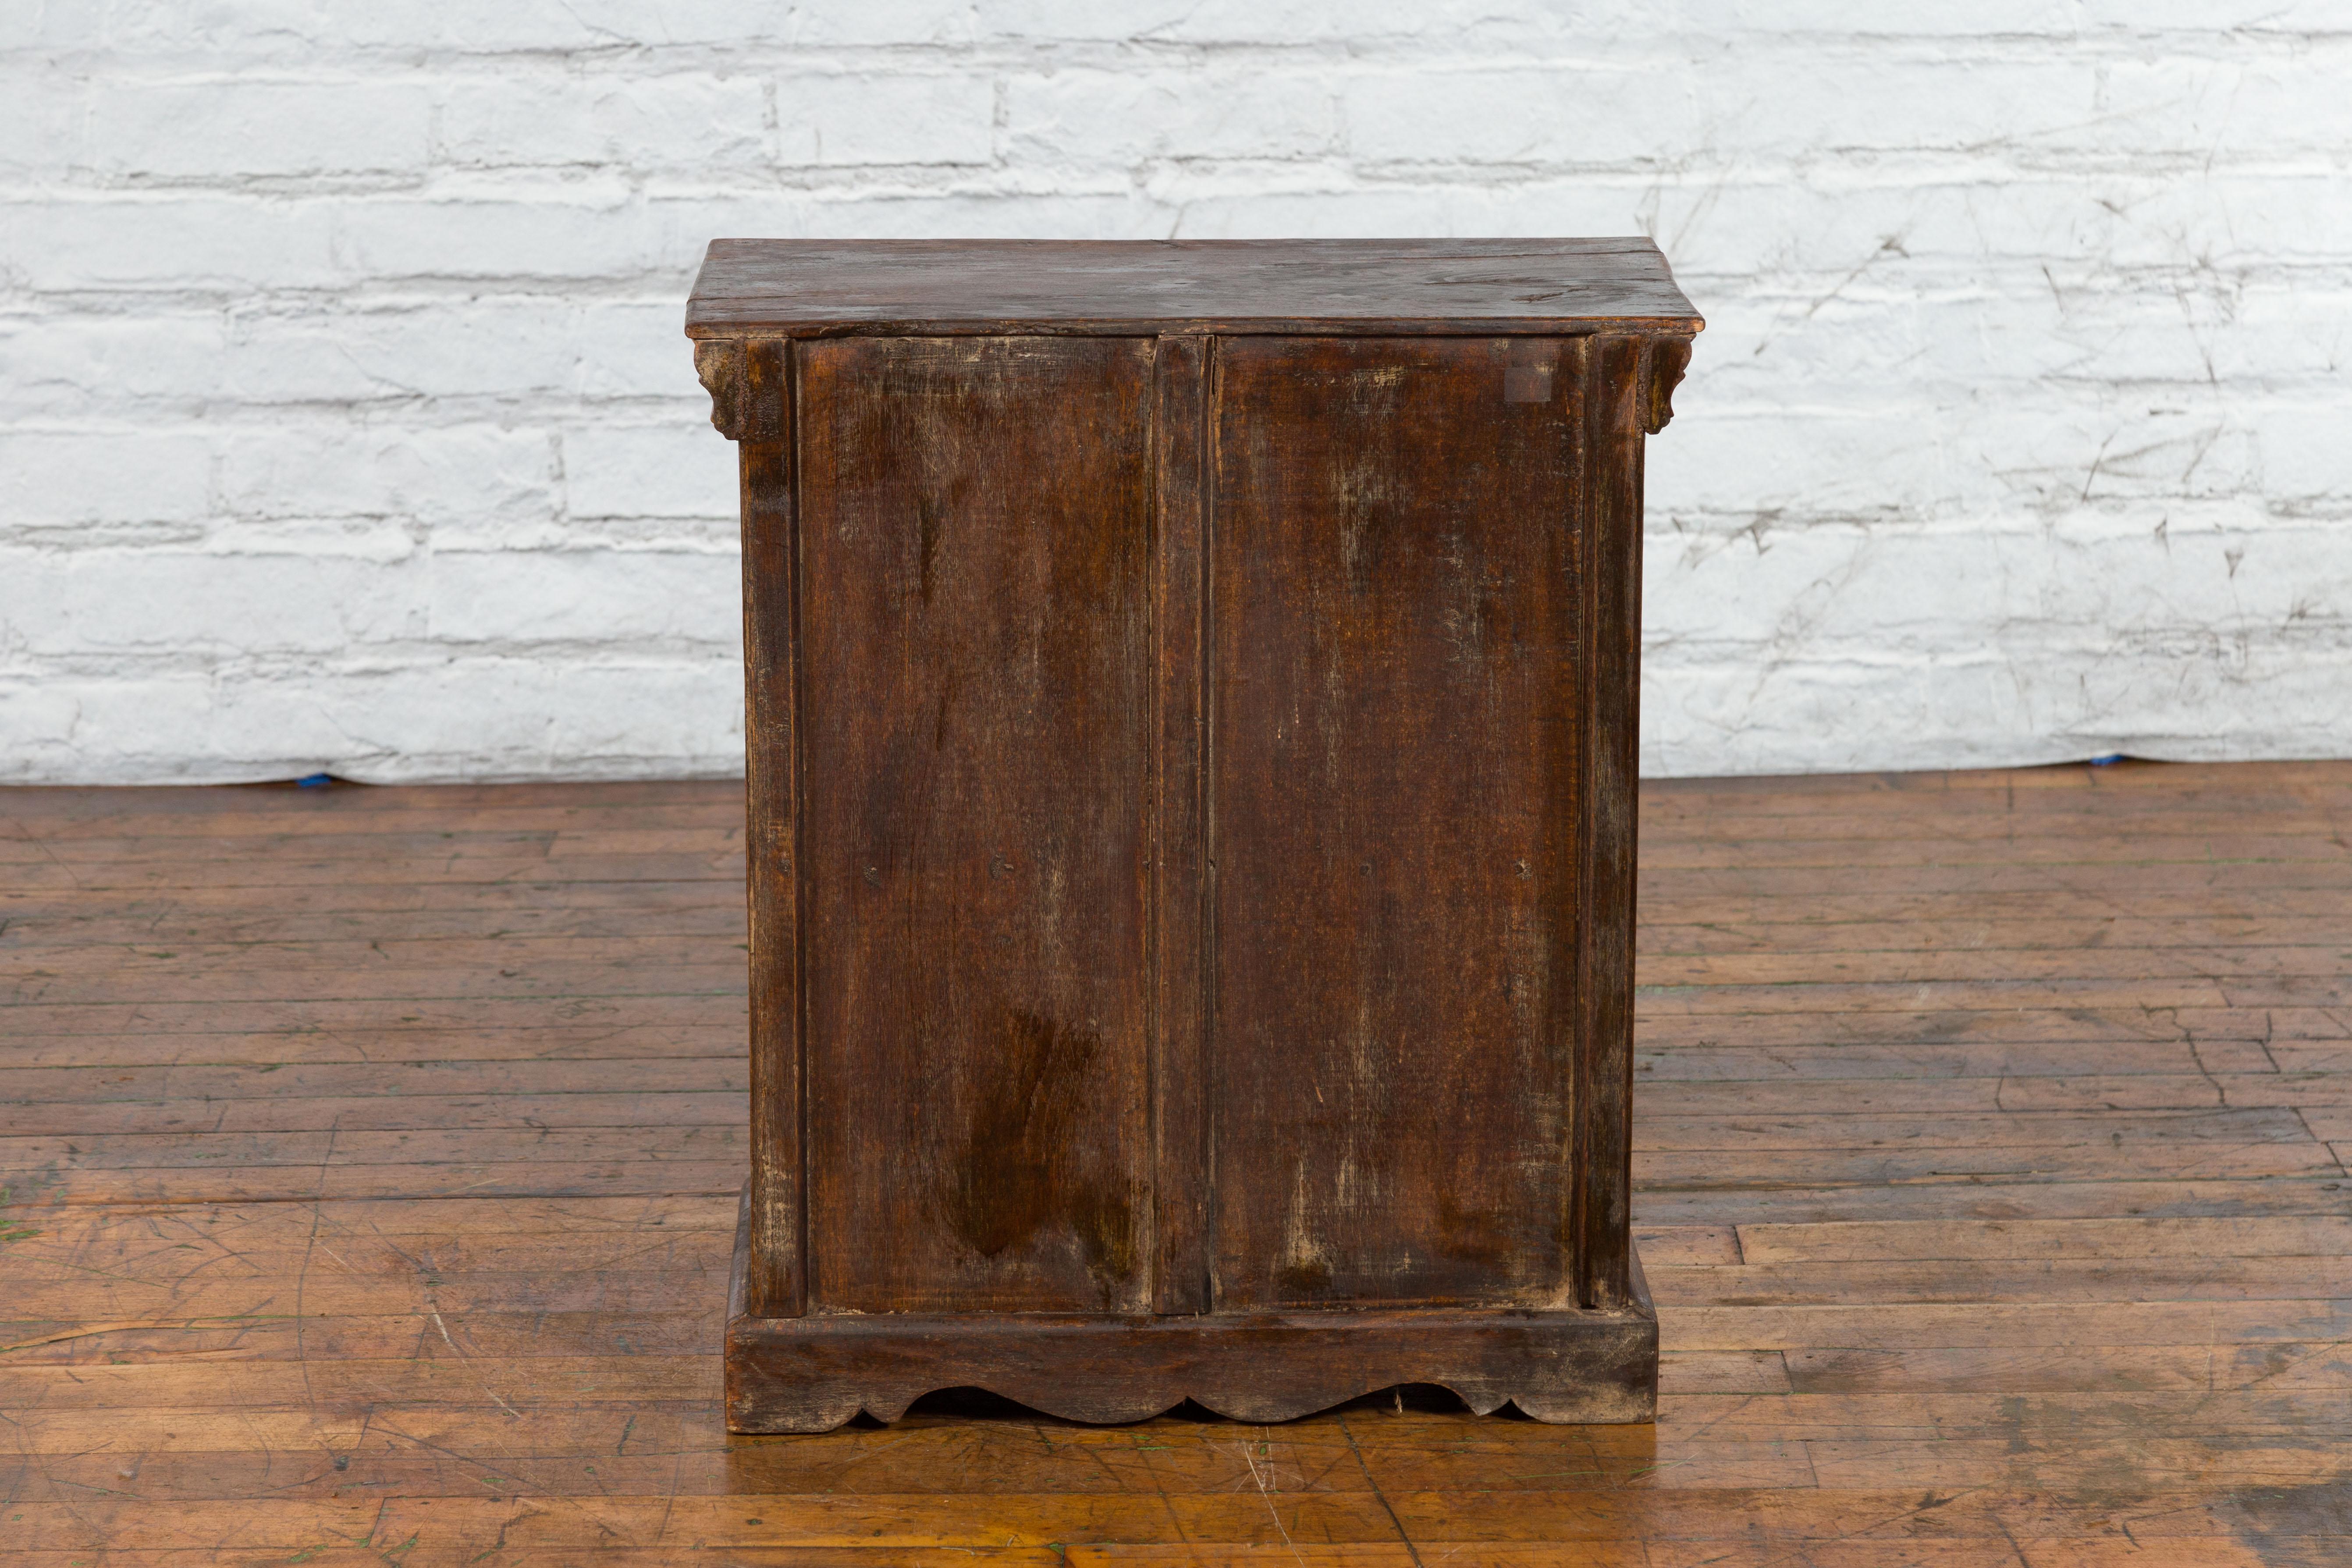 Rustic Indian Vintage Sheesham Small Cabinet with Iron Hardware Dark Patina 10